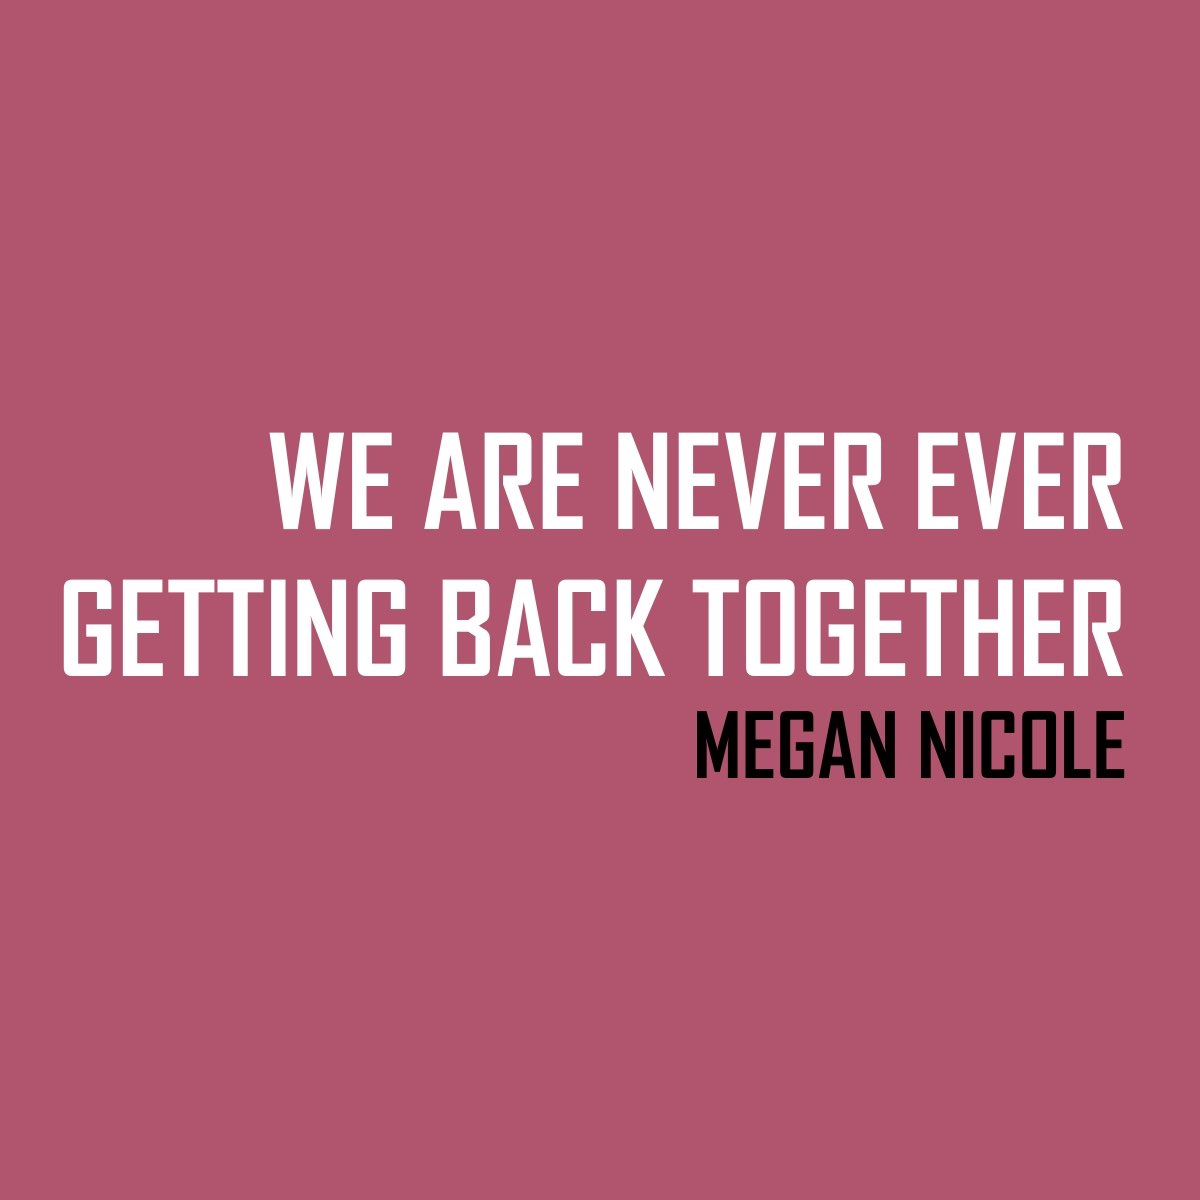 We are never ever getting back together. Песня we are never ever ever getting back together. Ever never. We are never ever getting back together gif. Getting back together